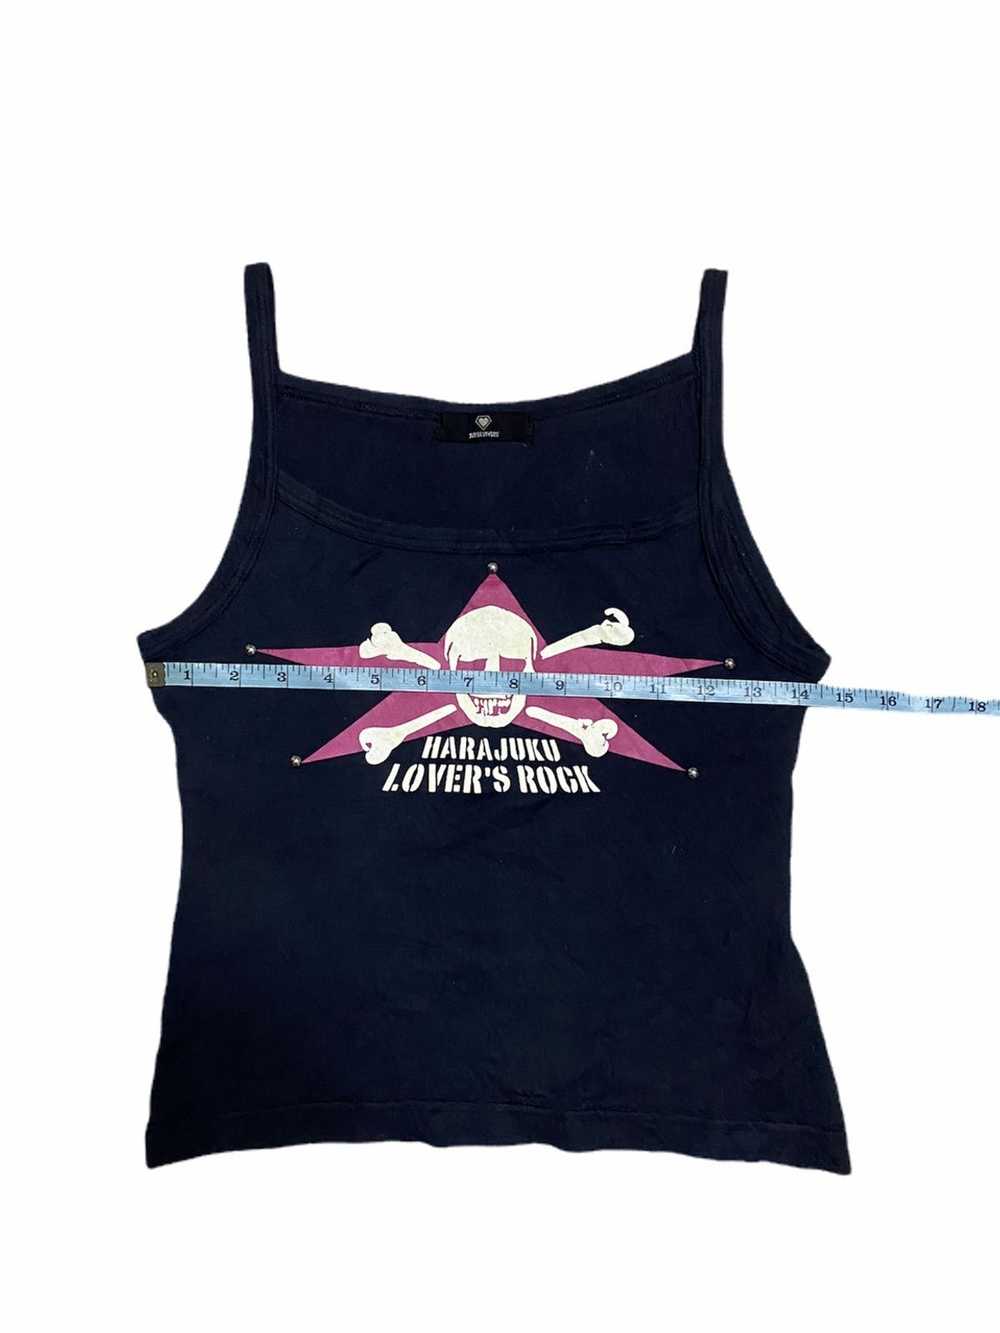 Japanese Brand SUPER LOVERS Tank Top for ladies - image 5